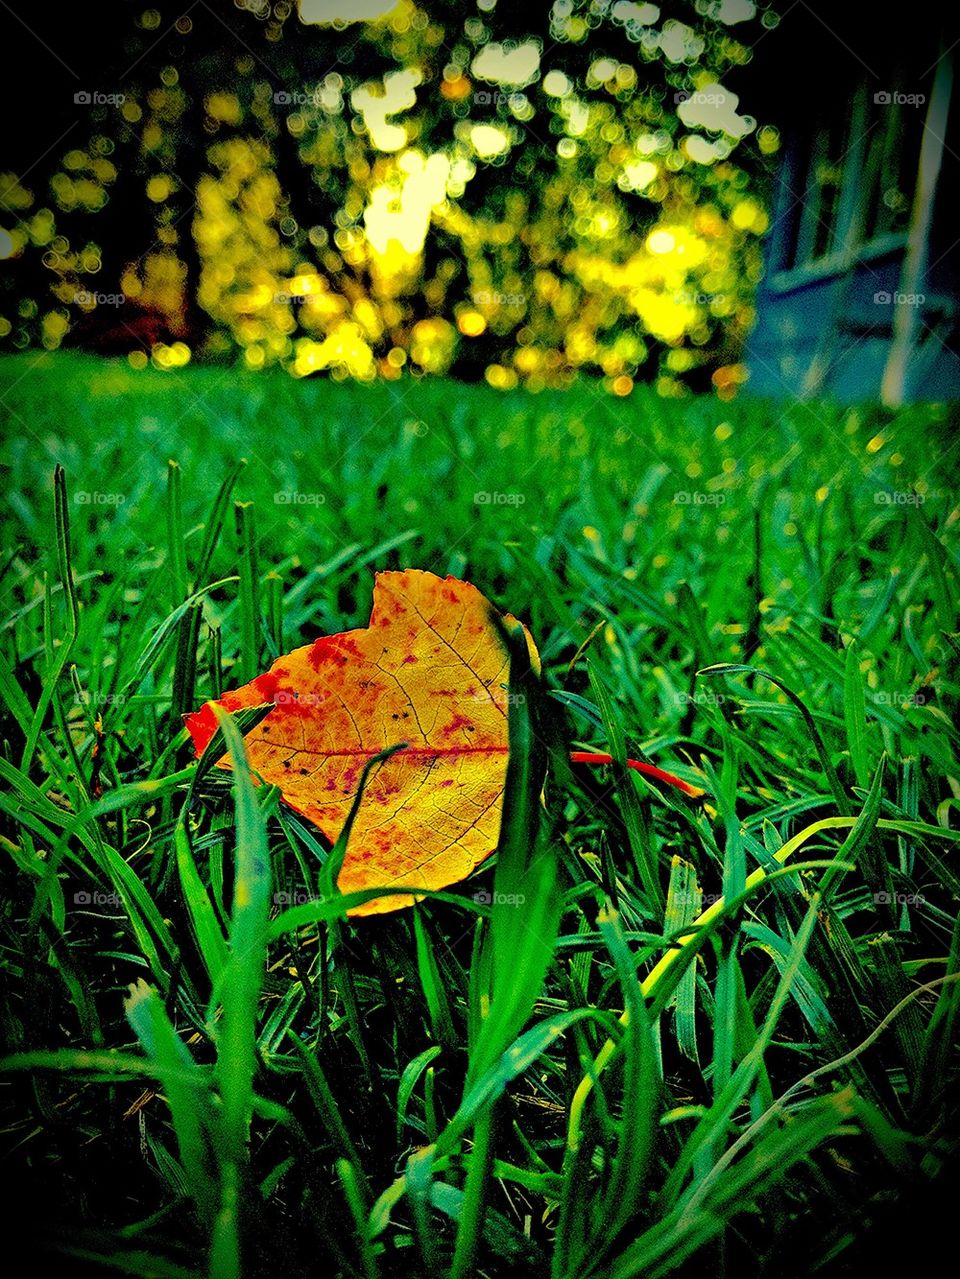 Leaf in the Grass